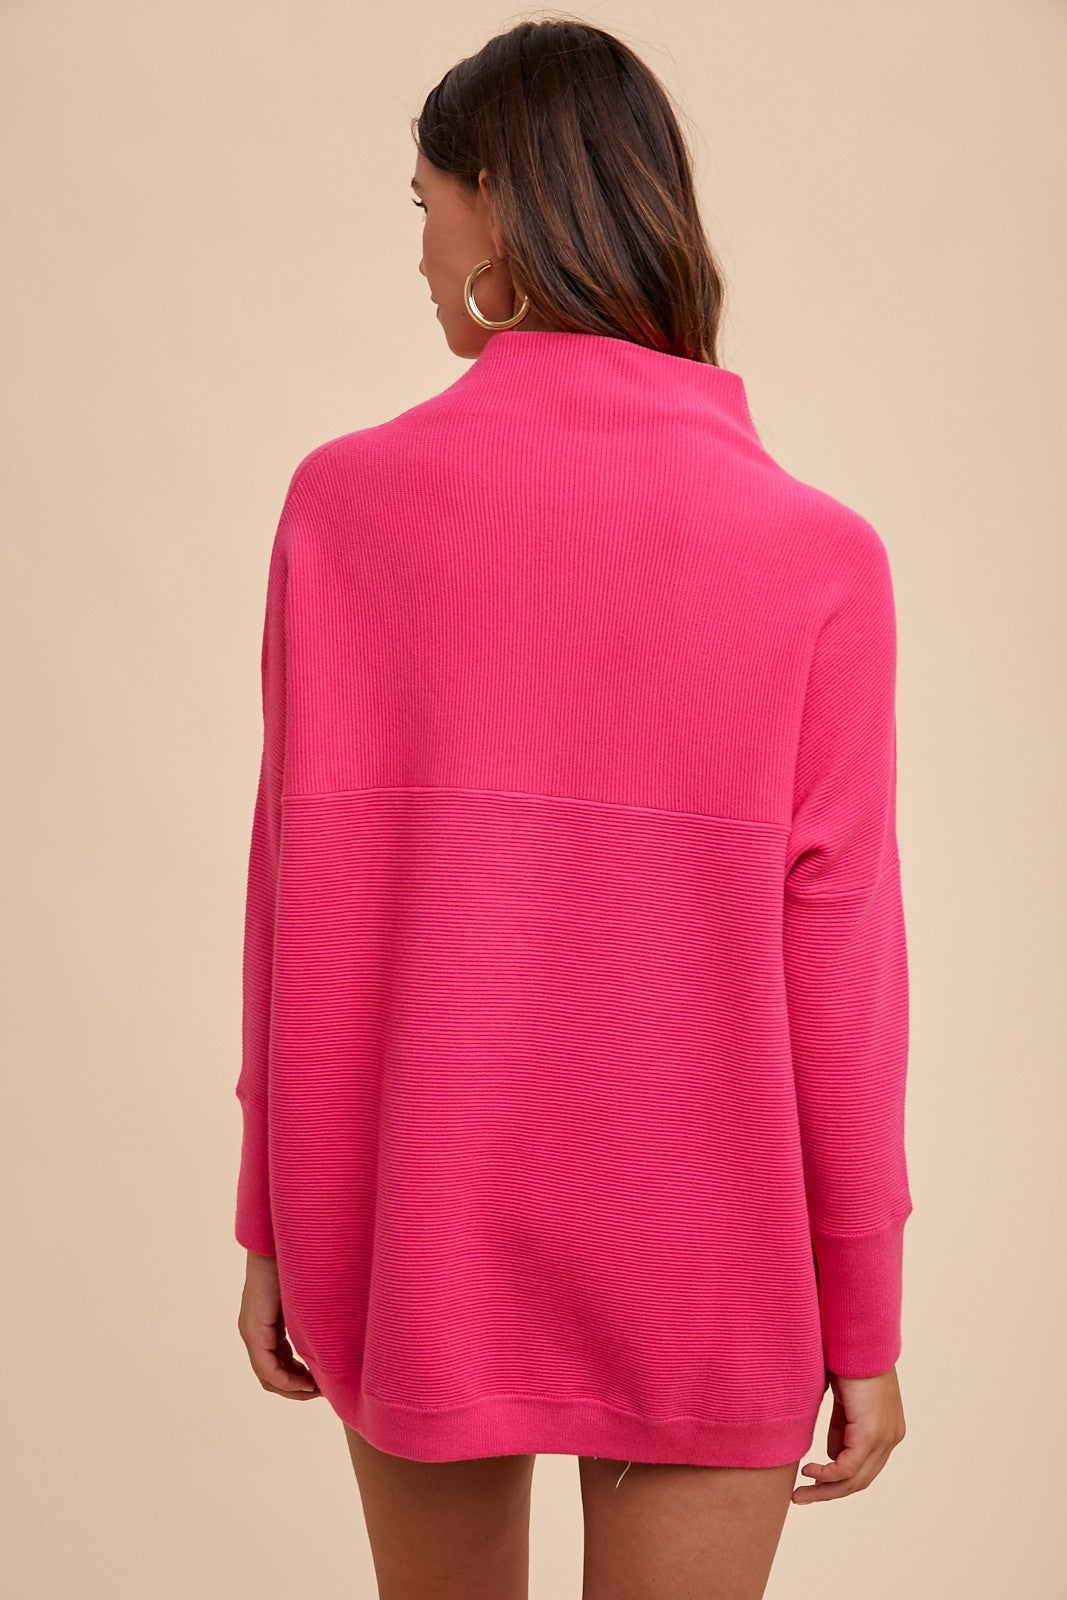 Hot Pink Oversized Fit Texture Sweater